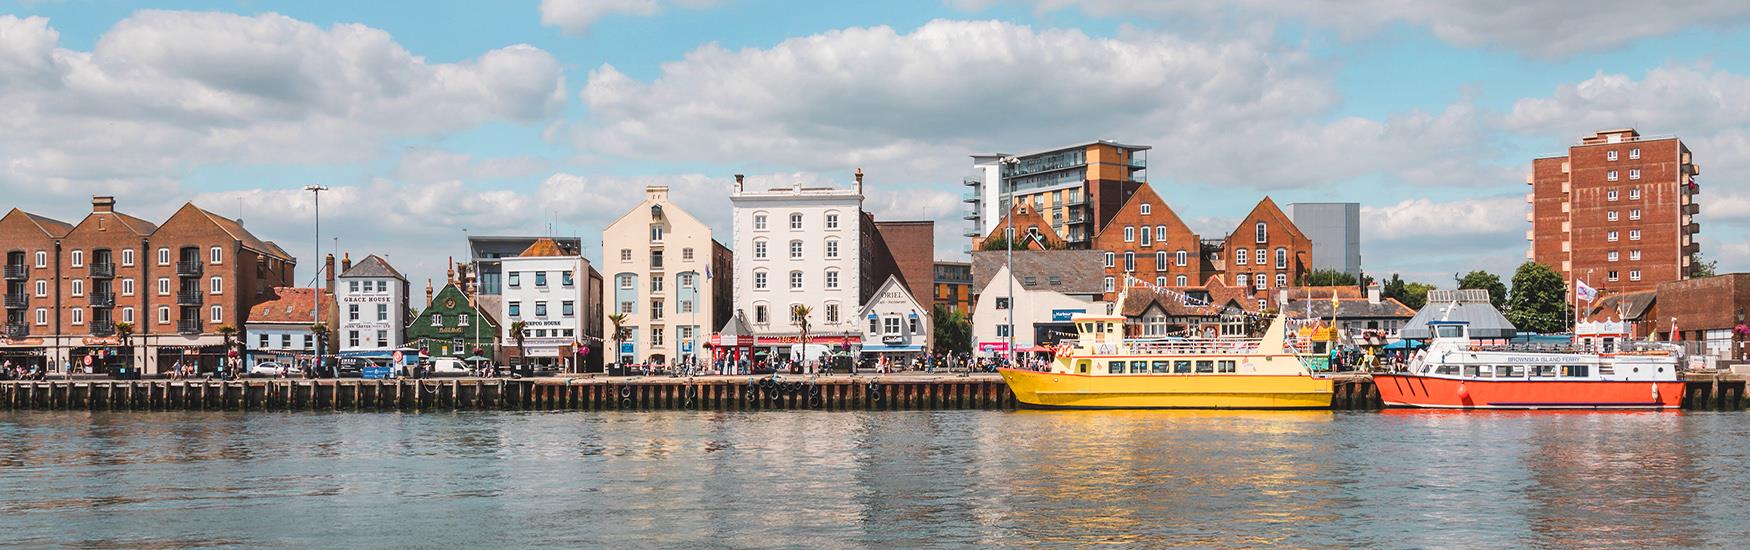 Plenty of fun watersports and amazing cruises in Poole |